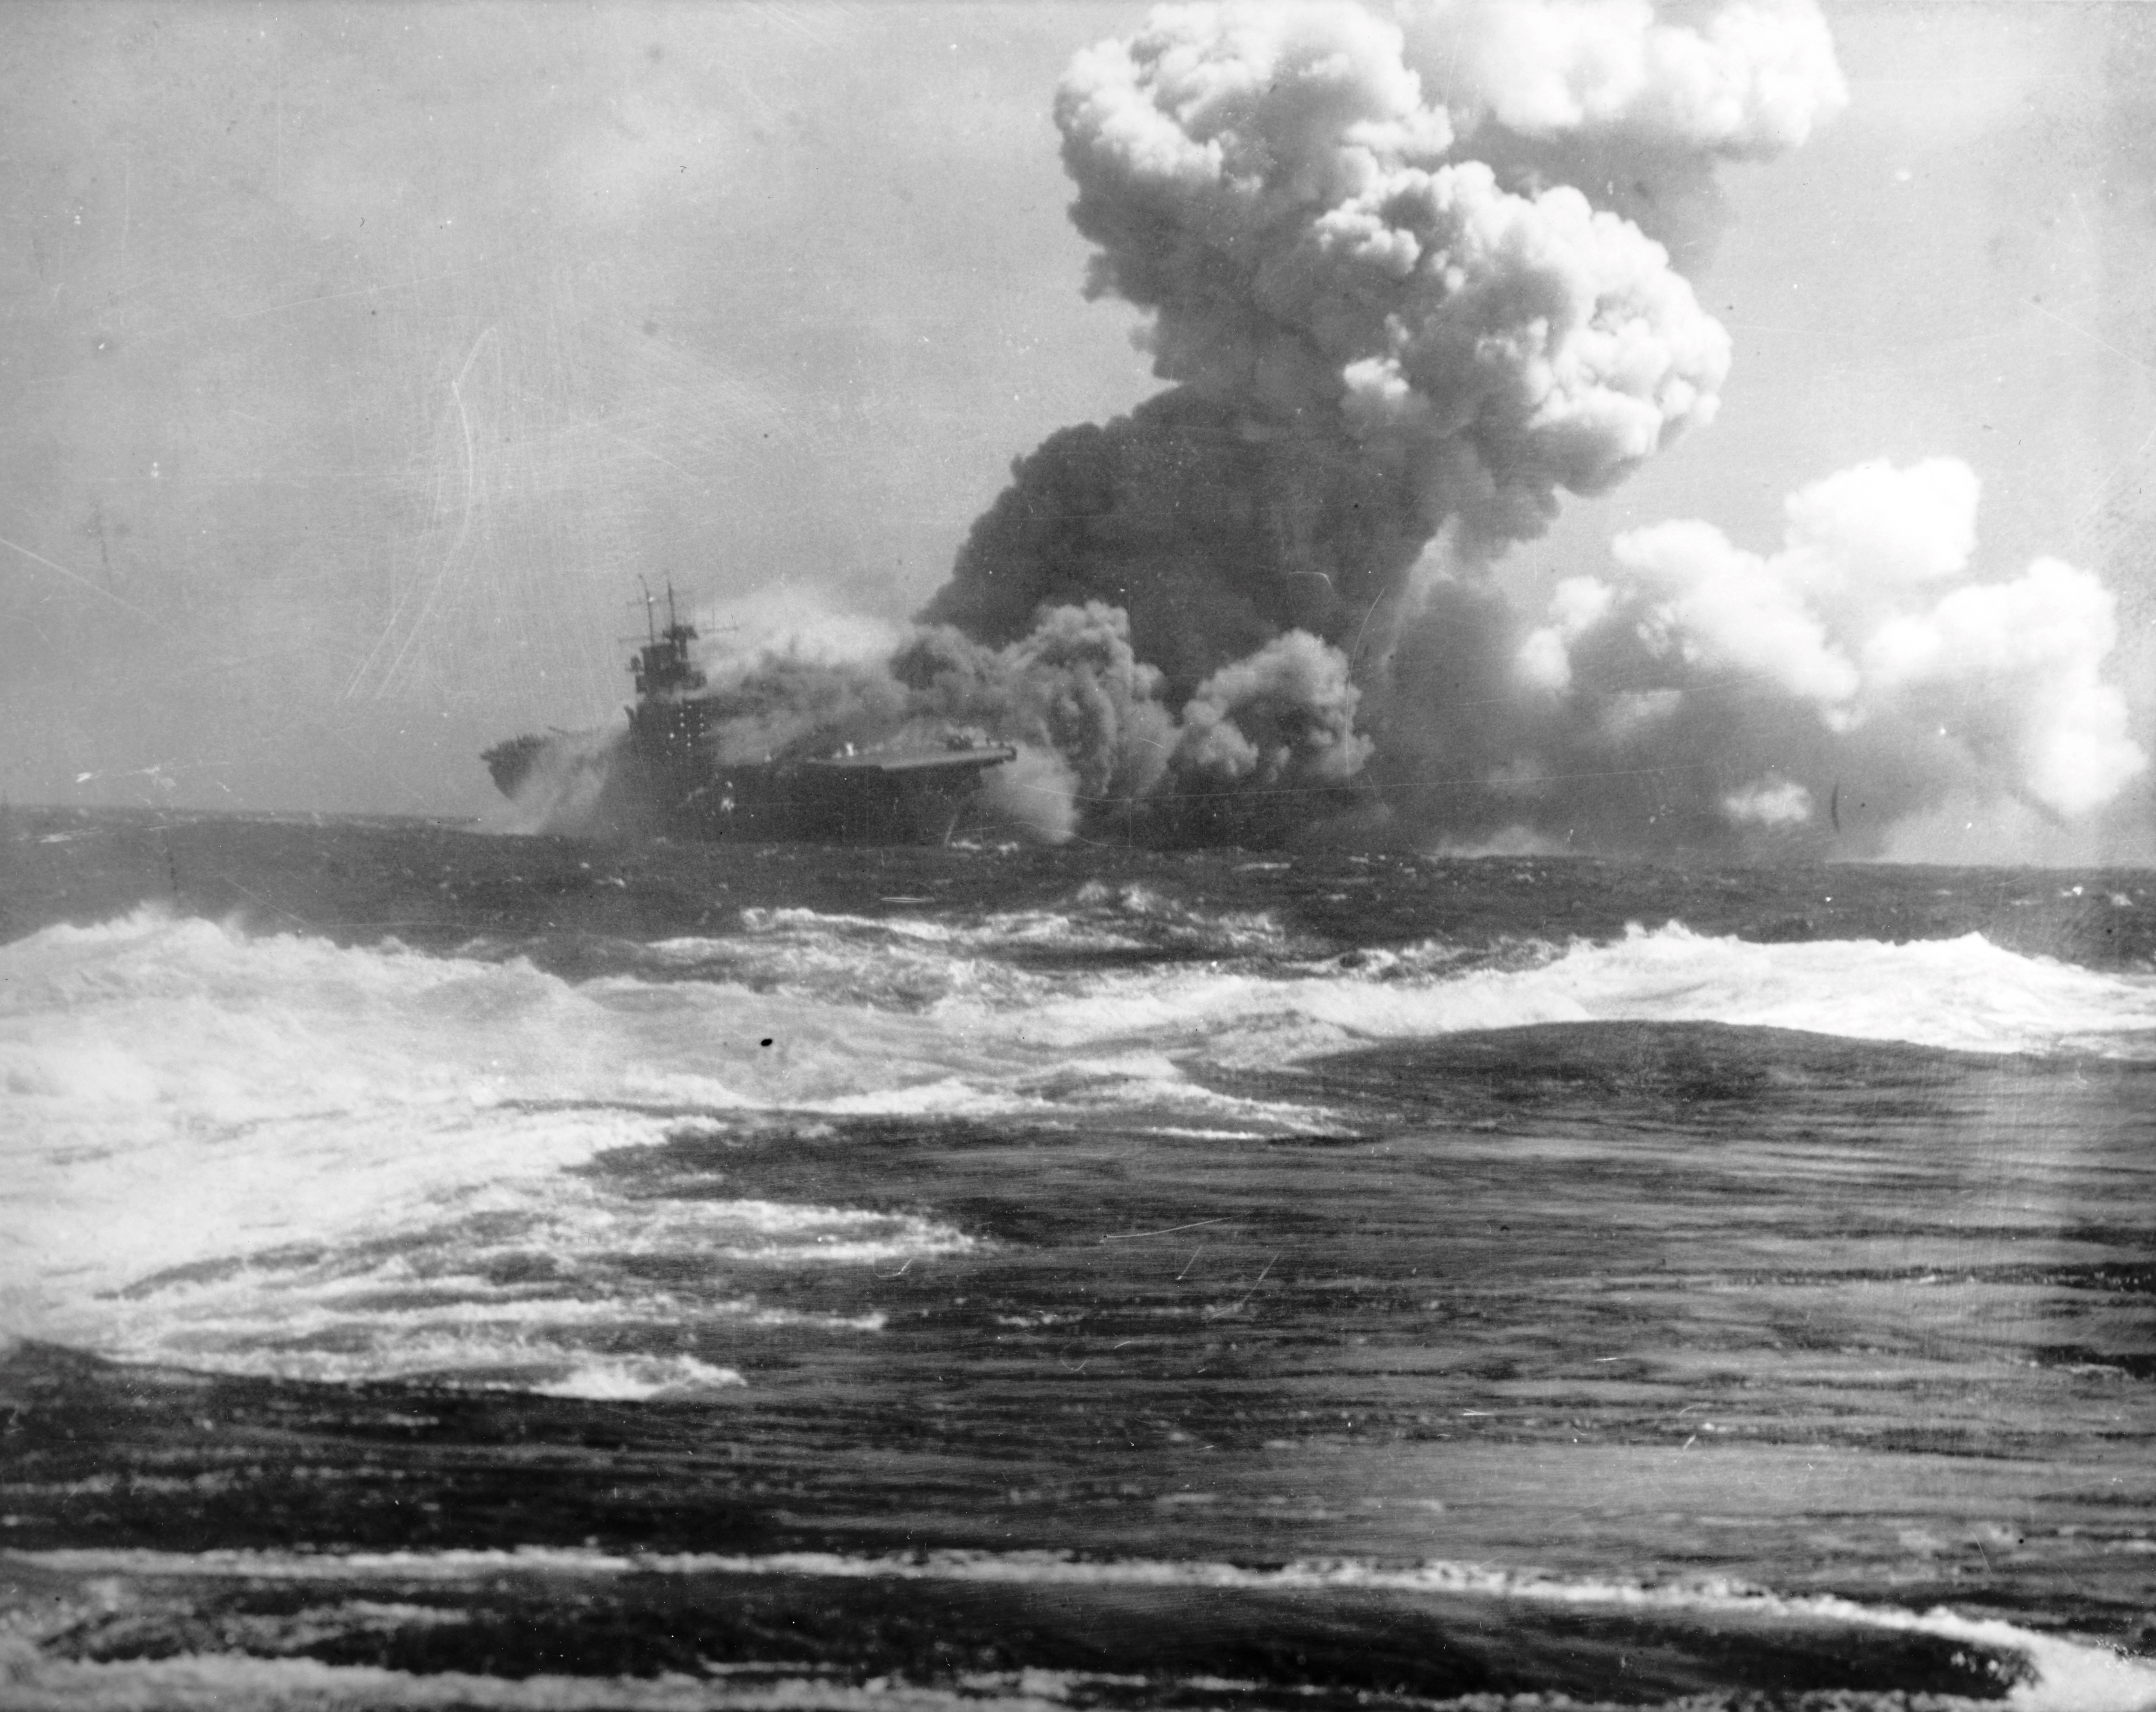 Wasp (Wasp-class) burning and listing after being torpedoed by Japanese submarine I-19 in the South Pacific, 15 Sep 1942. Photo 2 of 2.